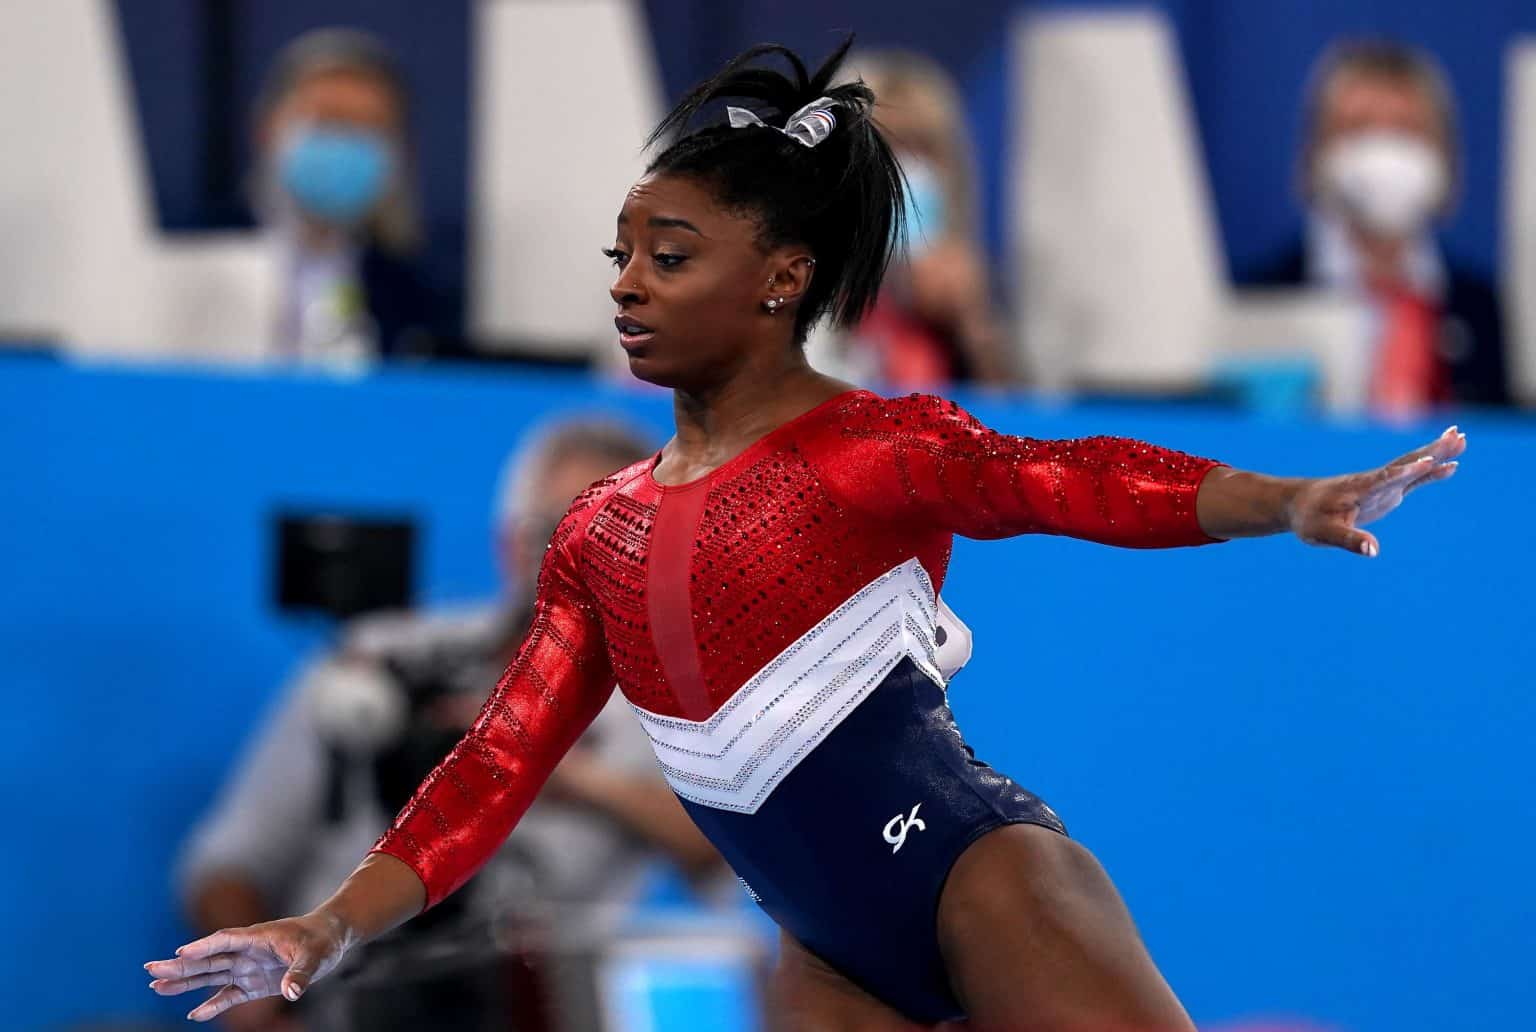 Simone Biles praised for speaking out about mental health struggles.